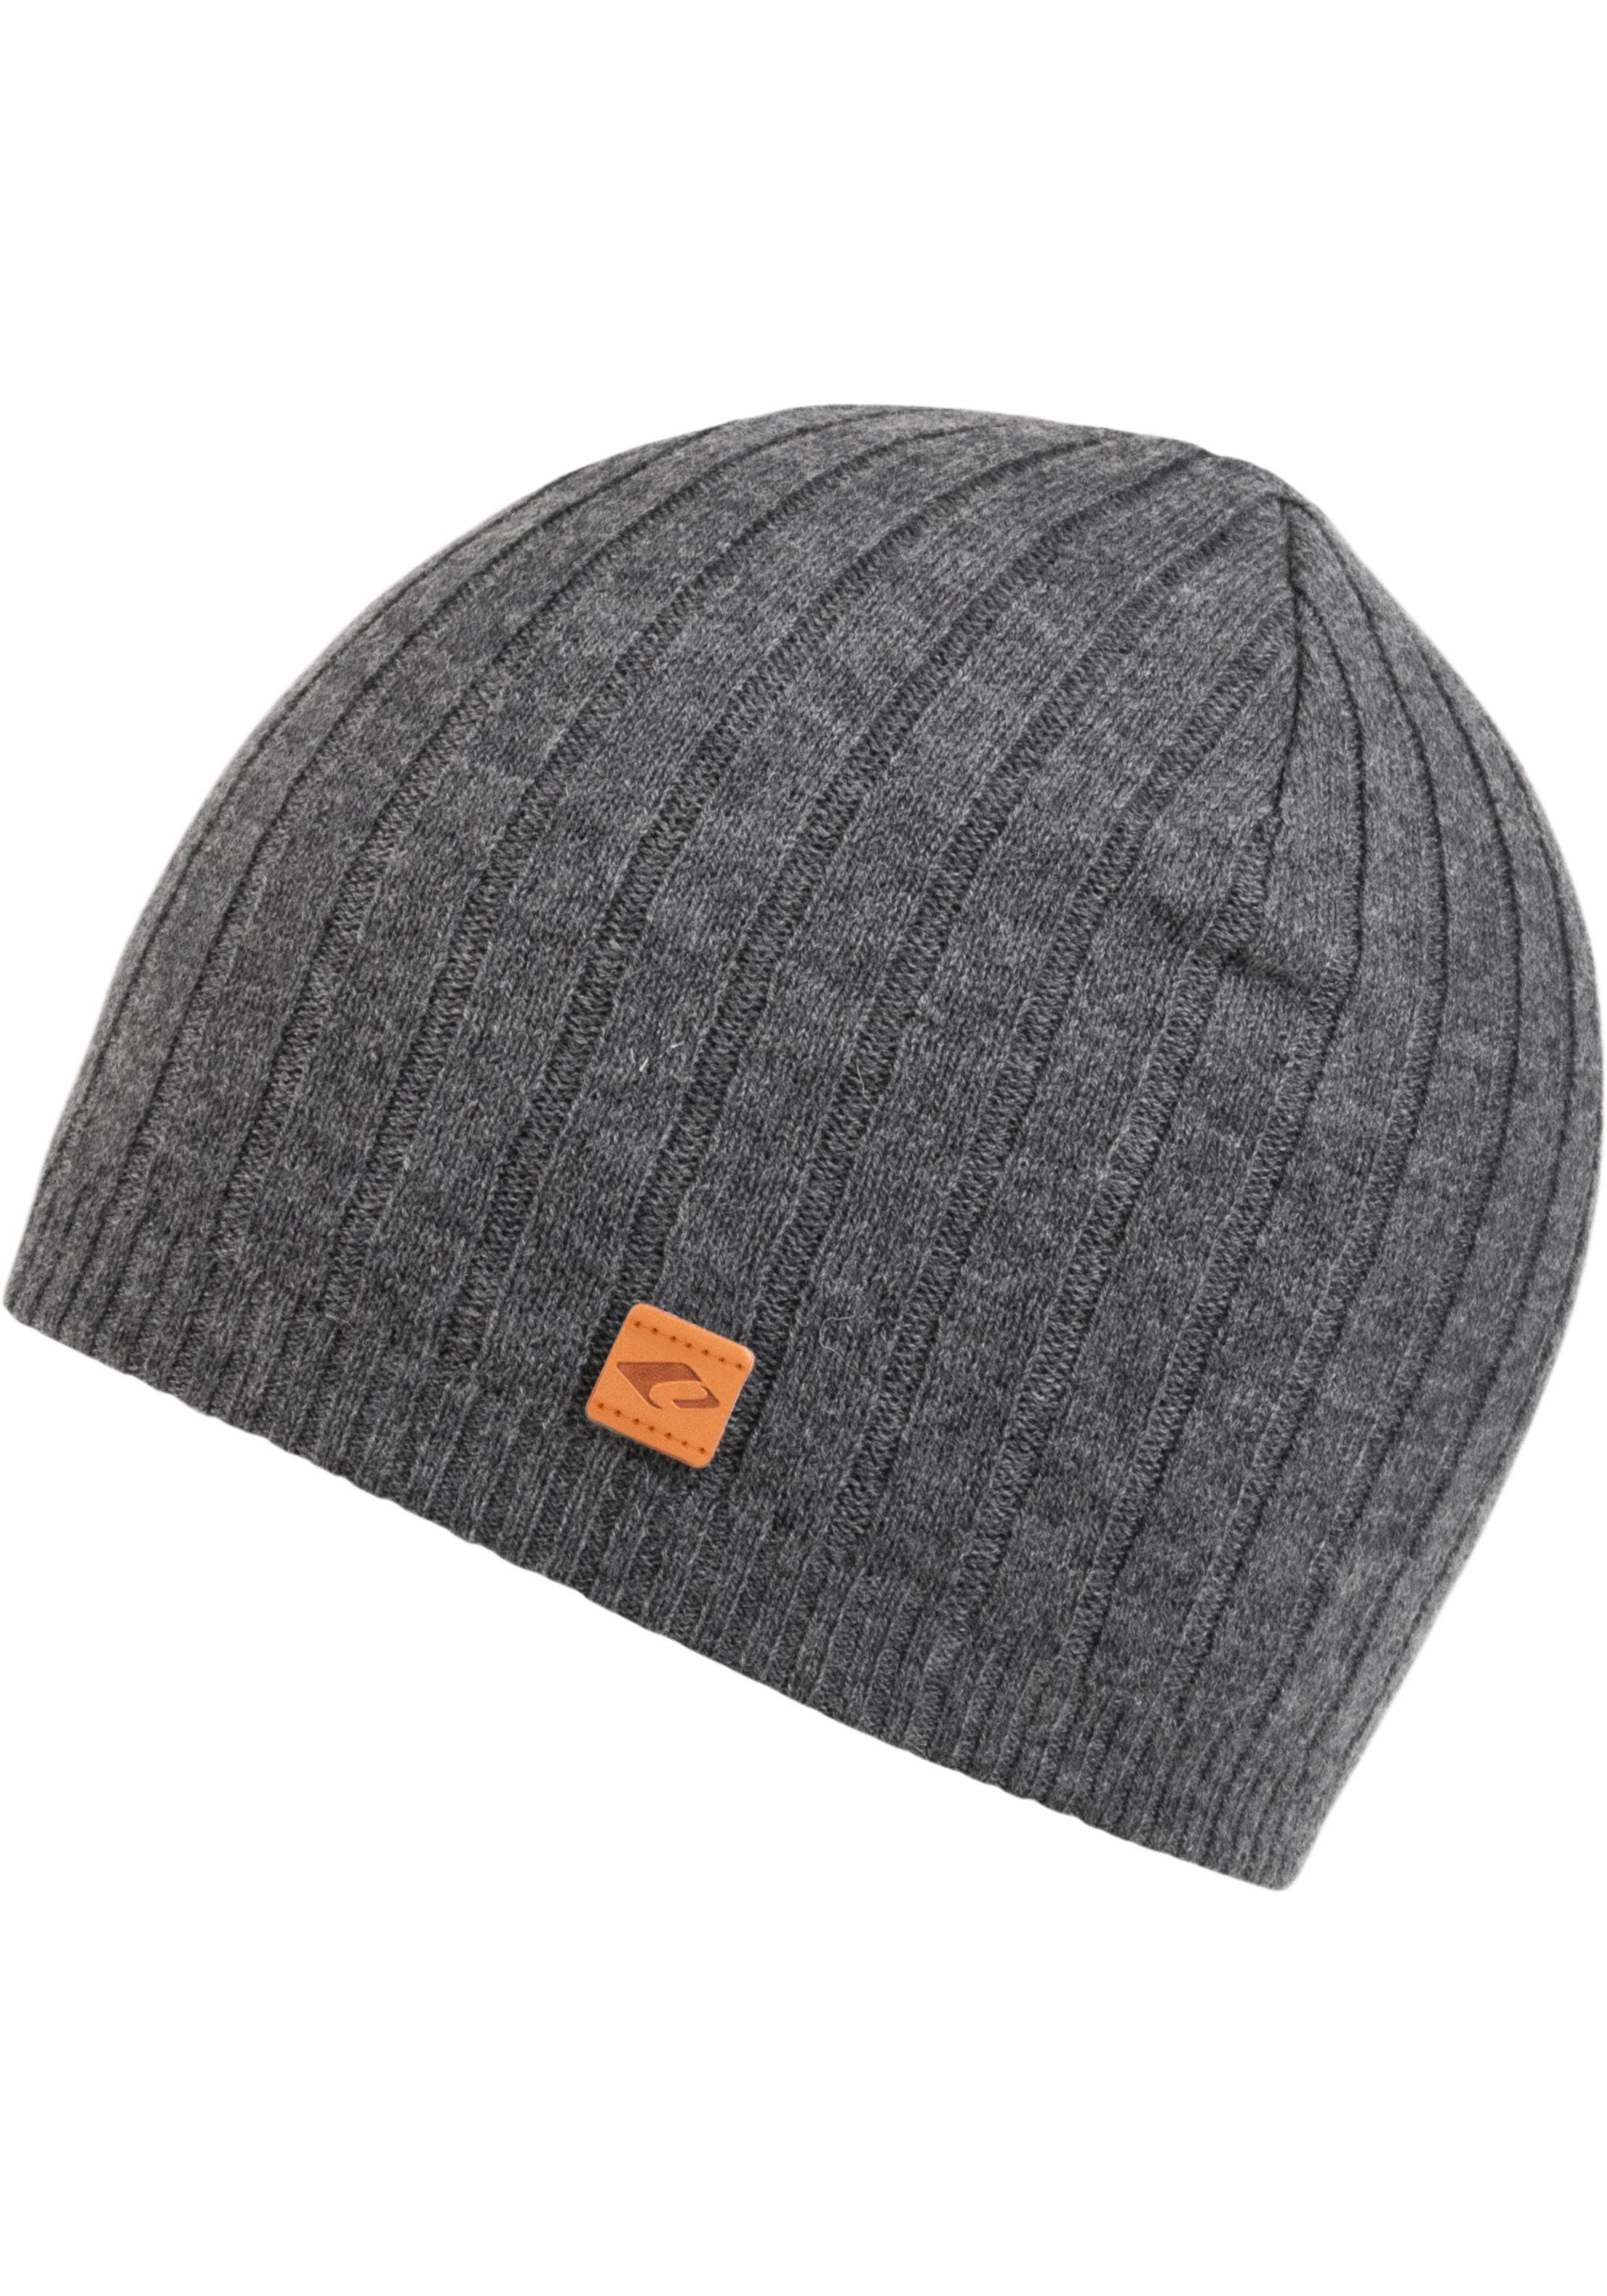 Doppellagig, Beanie grey melange chillouts angenehm Hat Alfred warm